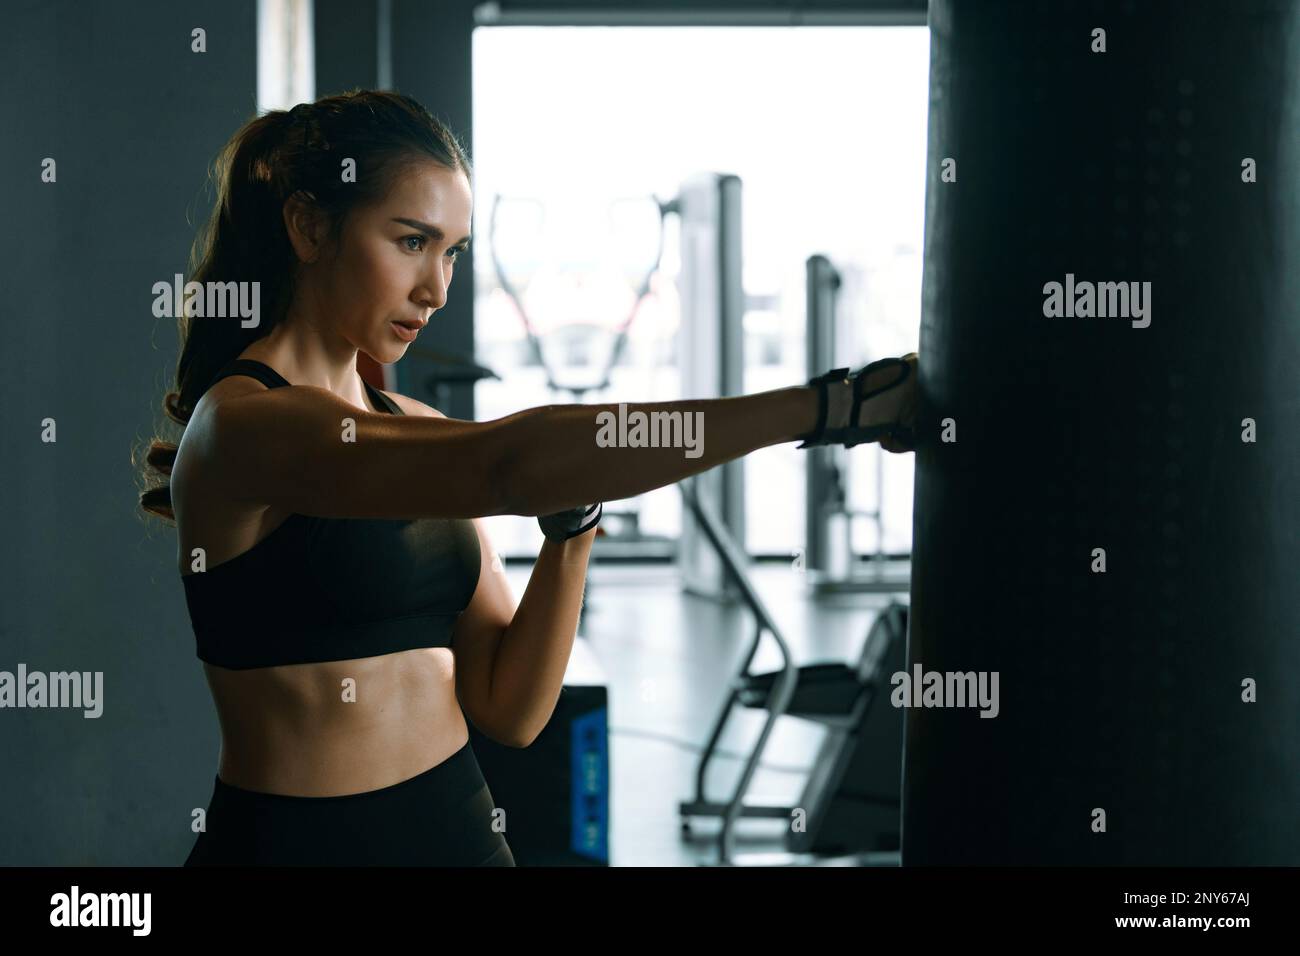 Young woman practicing boxing at the gym, she wears boxing gloves and hits a punching bag. Stock Photo